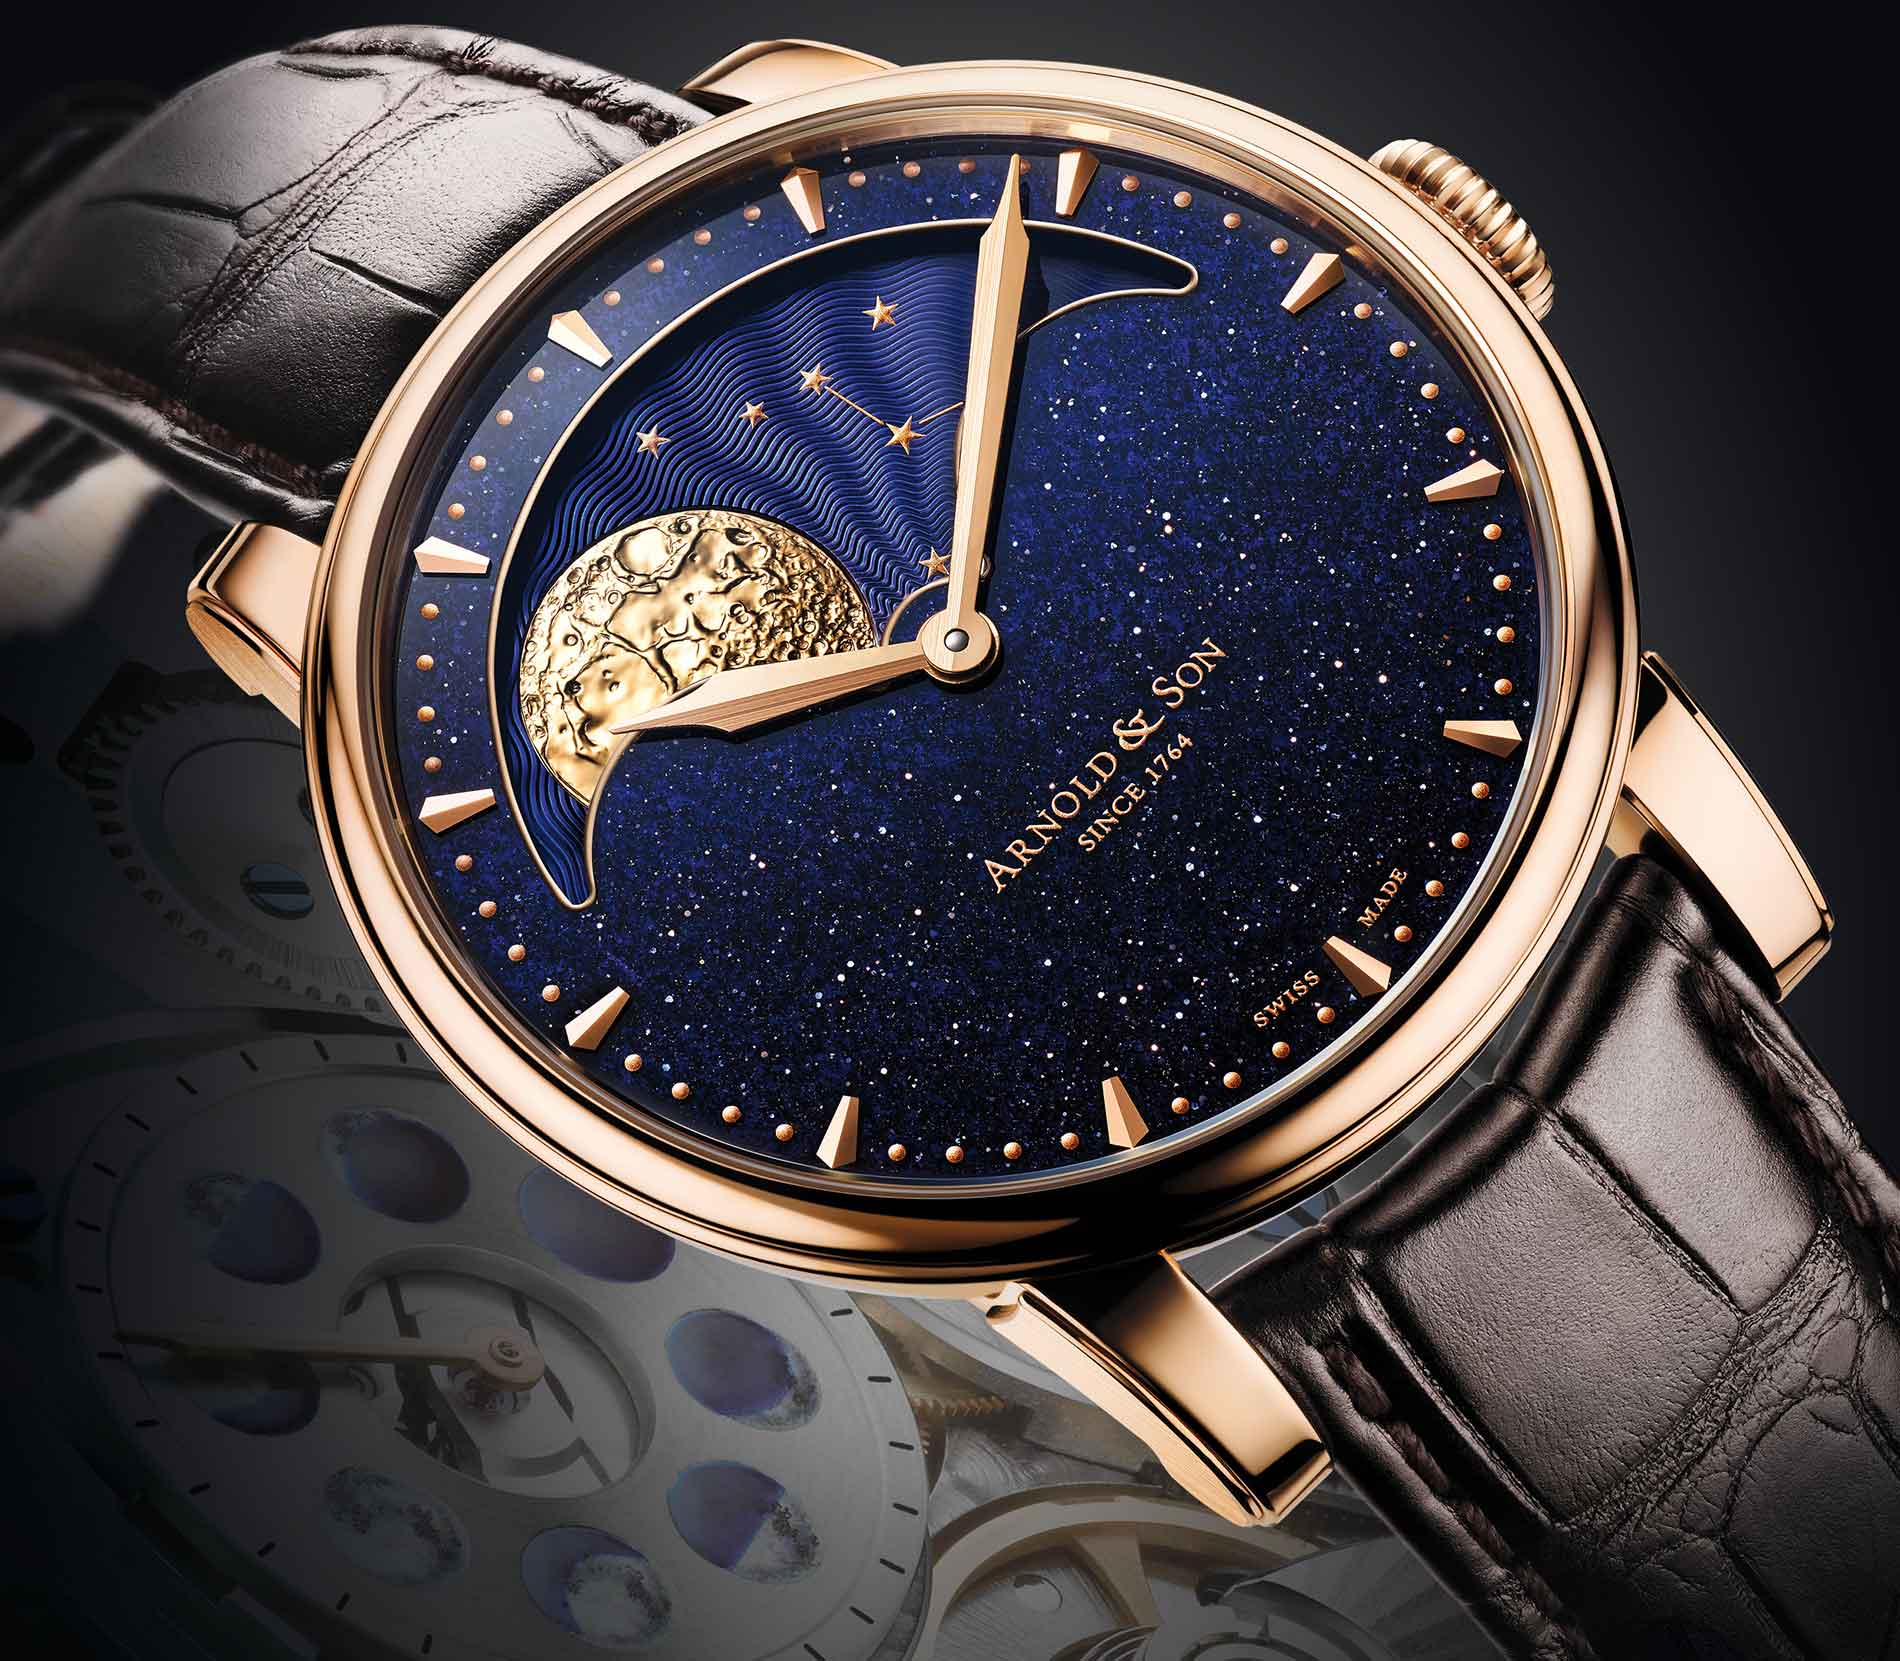 HM Perpetual Moon Aventurine continues Arnold & Son’s tradition of astronomical timepieces